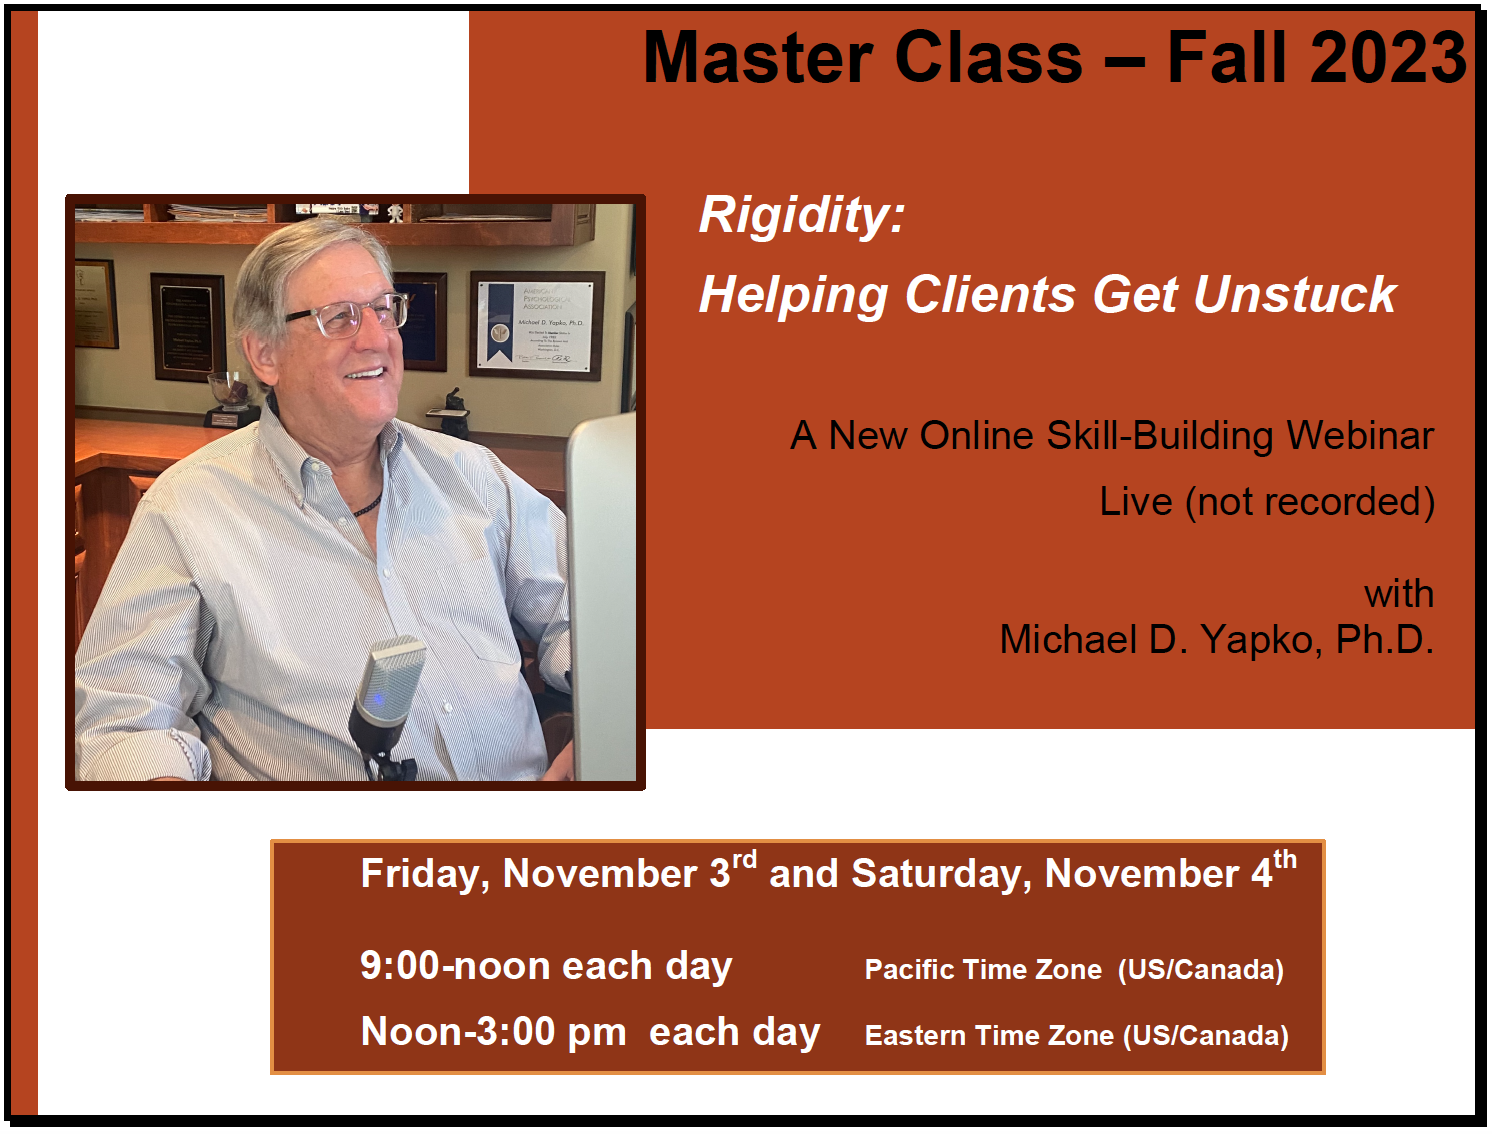 2023 Master Class - Rigidity: Helping Clients Get Unstuck